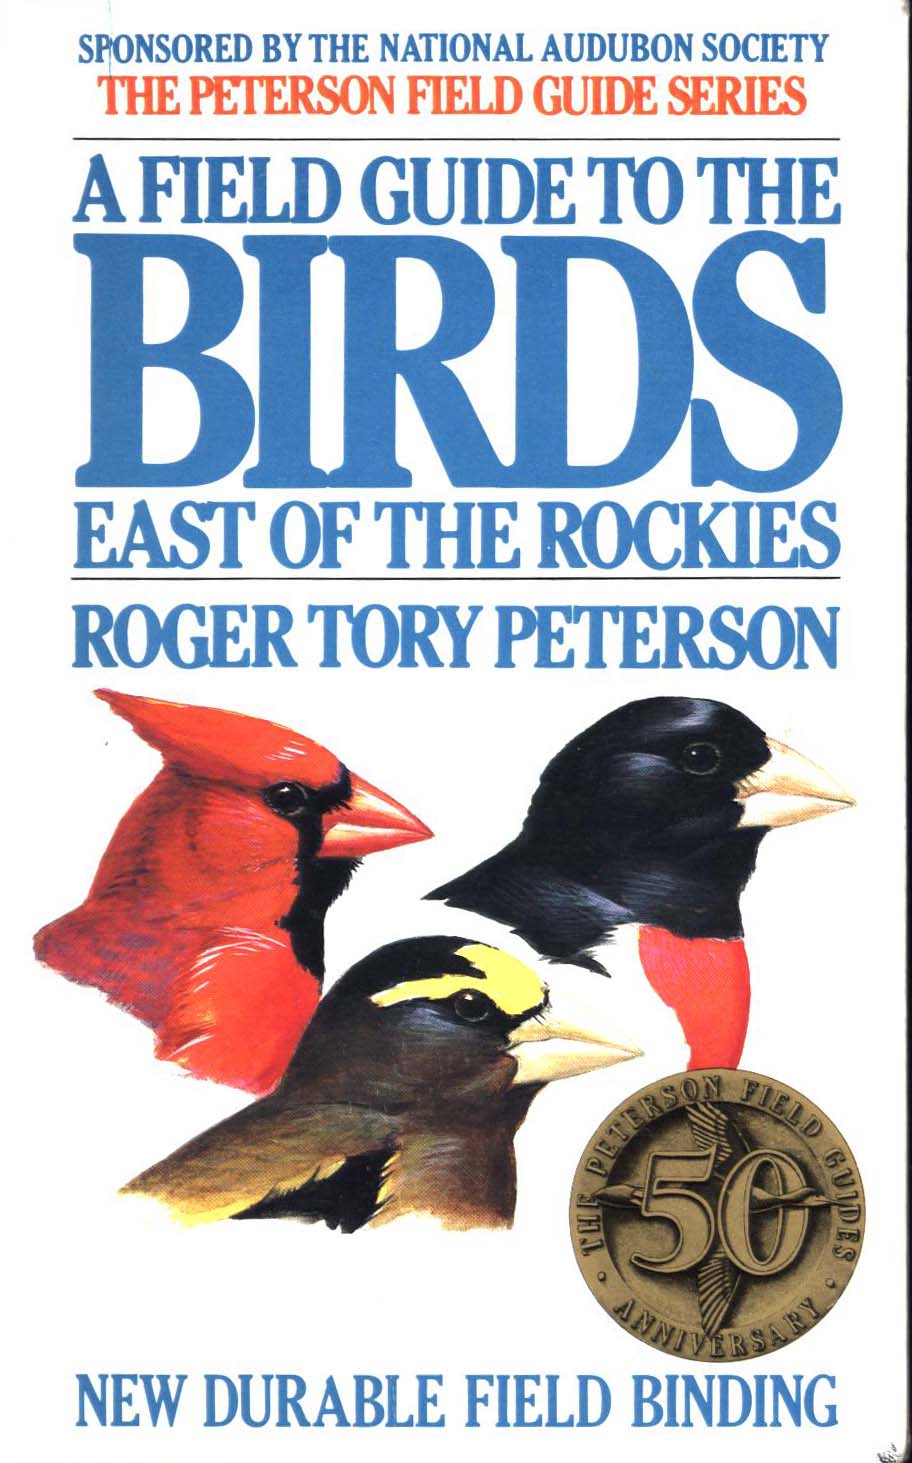 A FIELD GUIDE TO THE BIRDS EAST OF THE ROCKIES. 